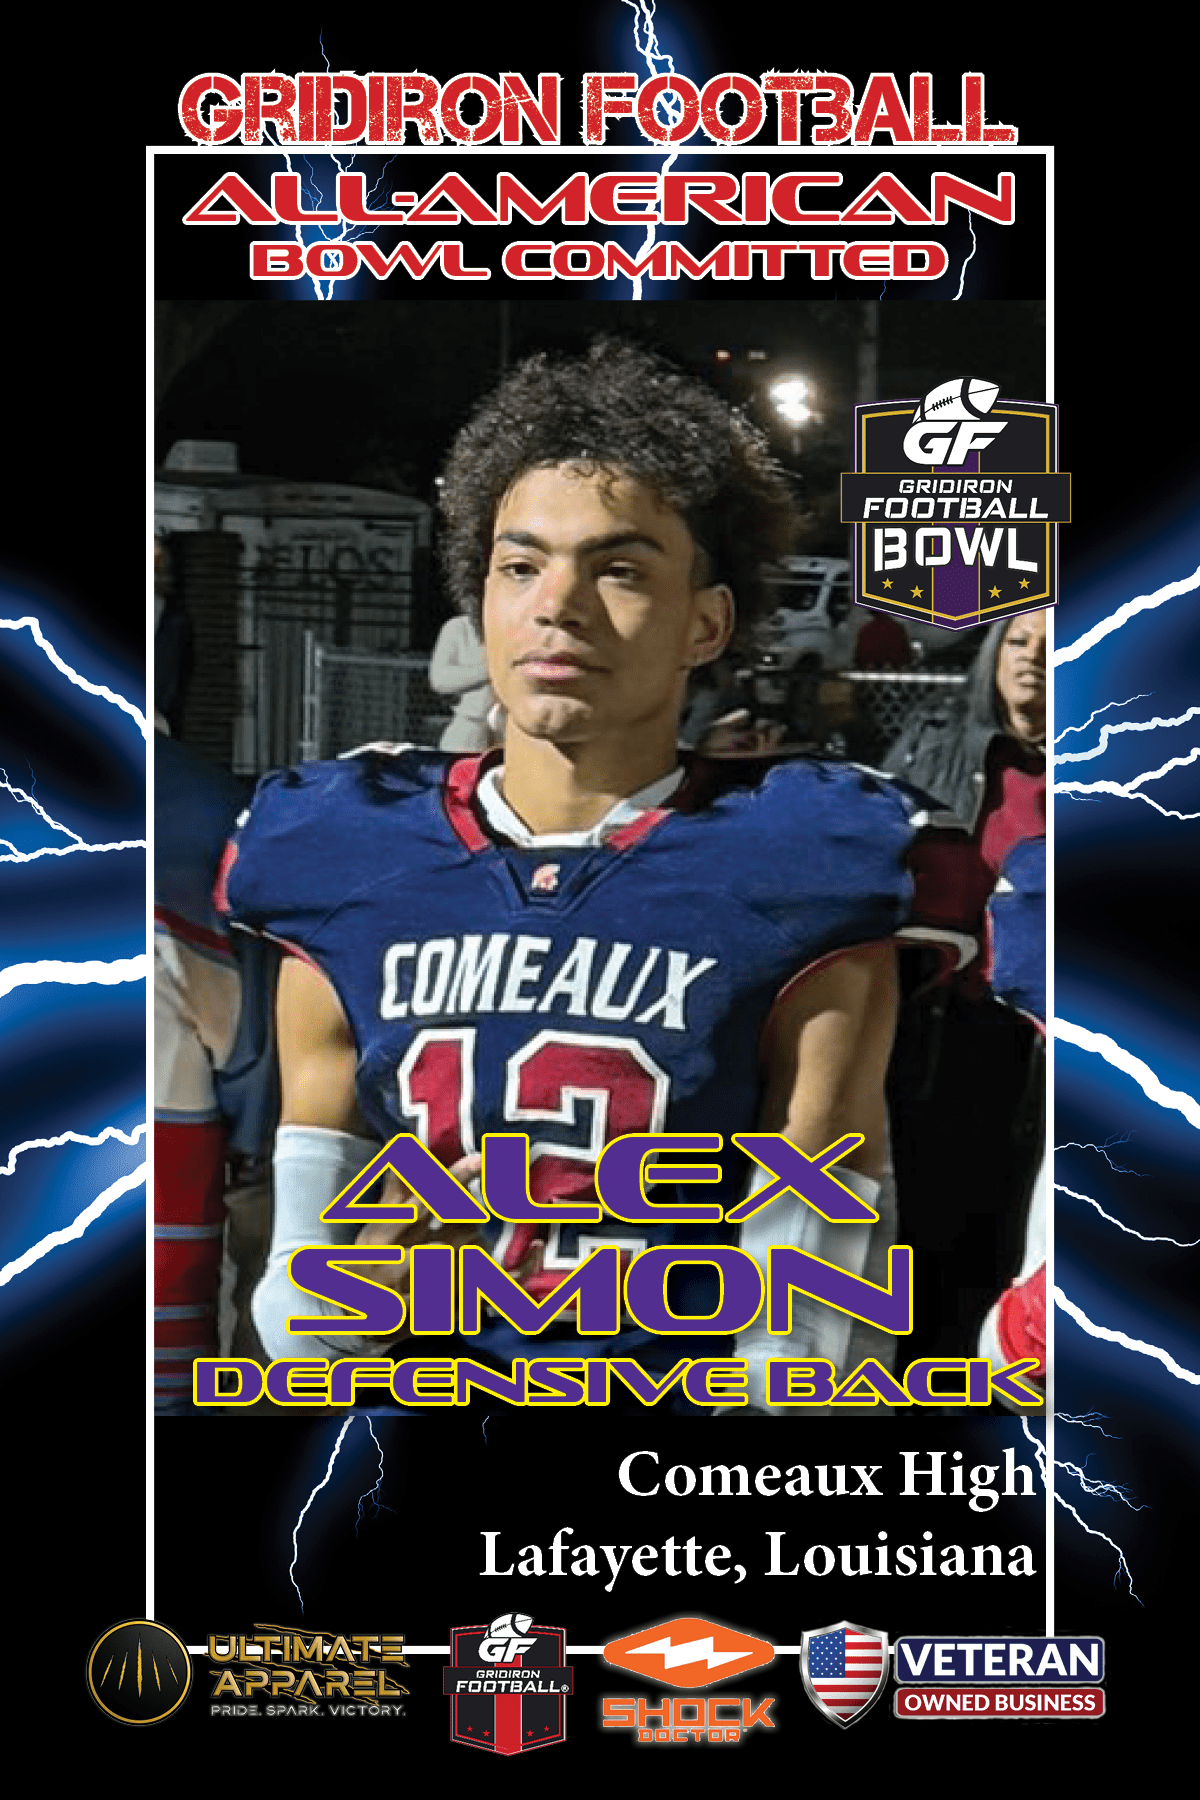 BREAKING NEWS: Comeaux High School (Lafayette, LA) DB Alex Simon Commits To The Gridiron Football All-American Bowl Game